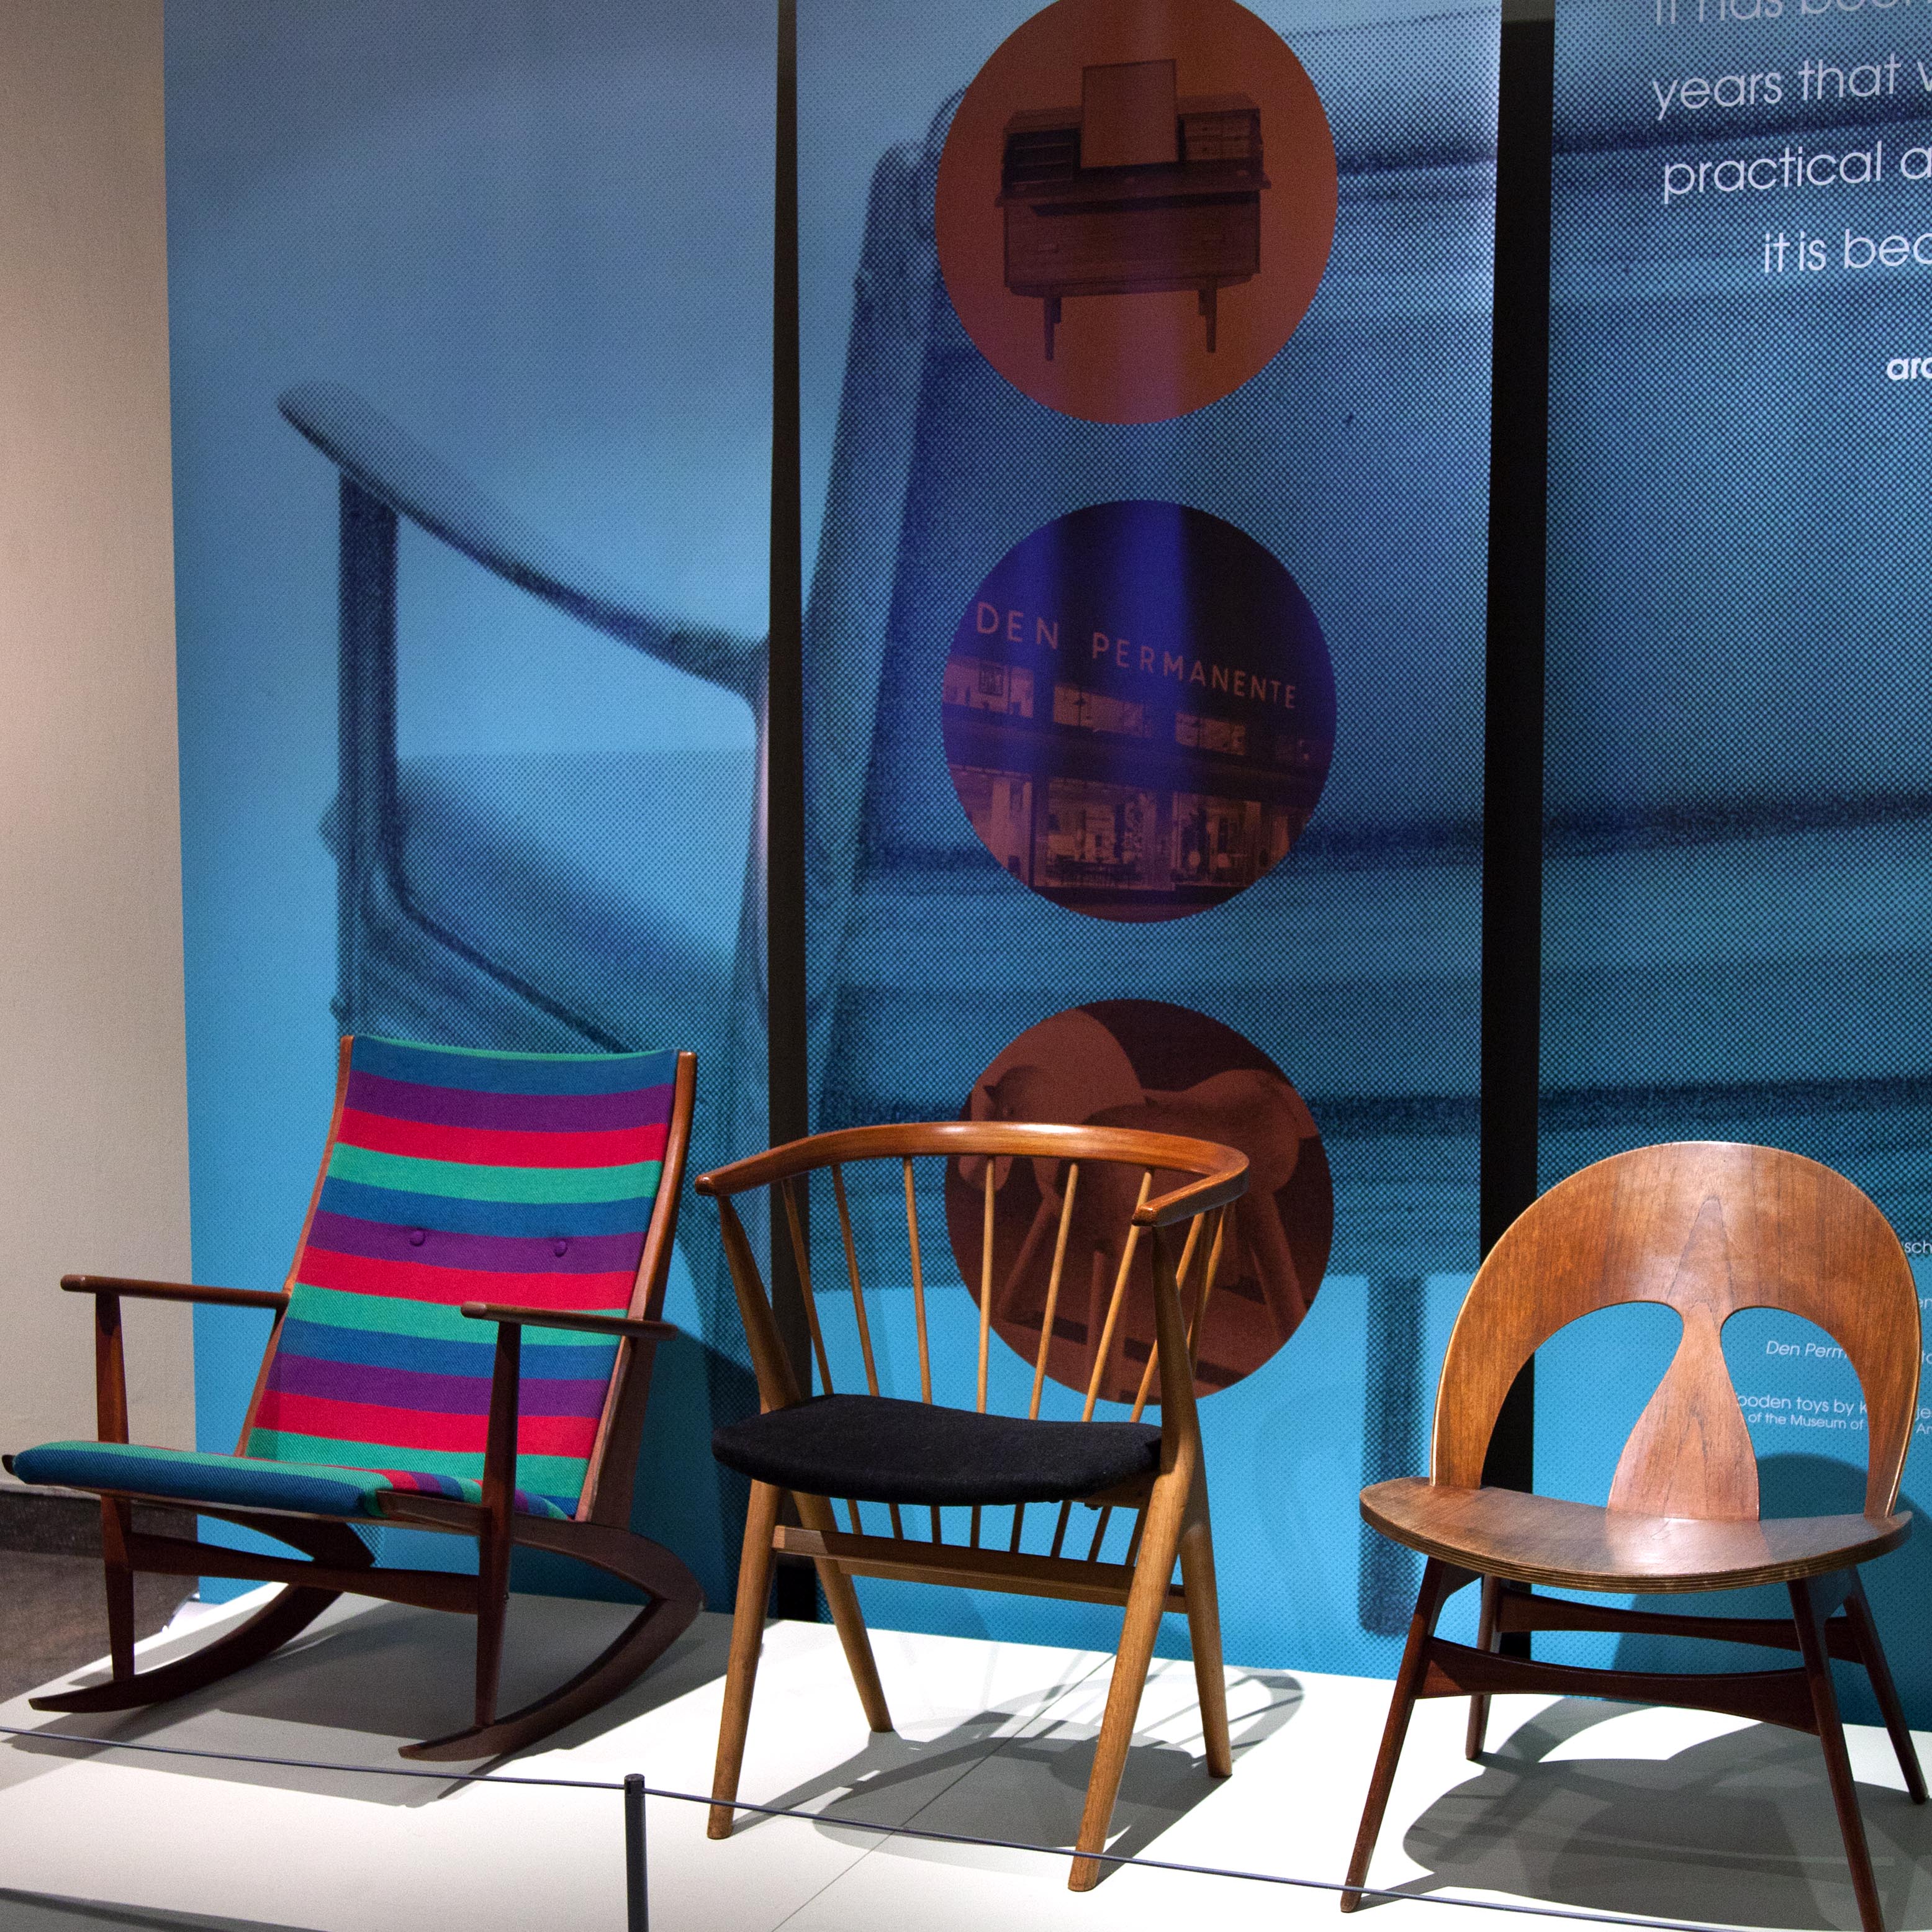 Danish Modern exhibition with chairs